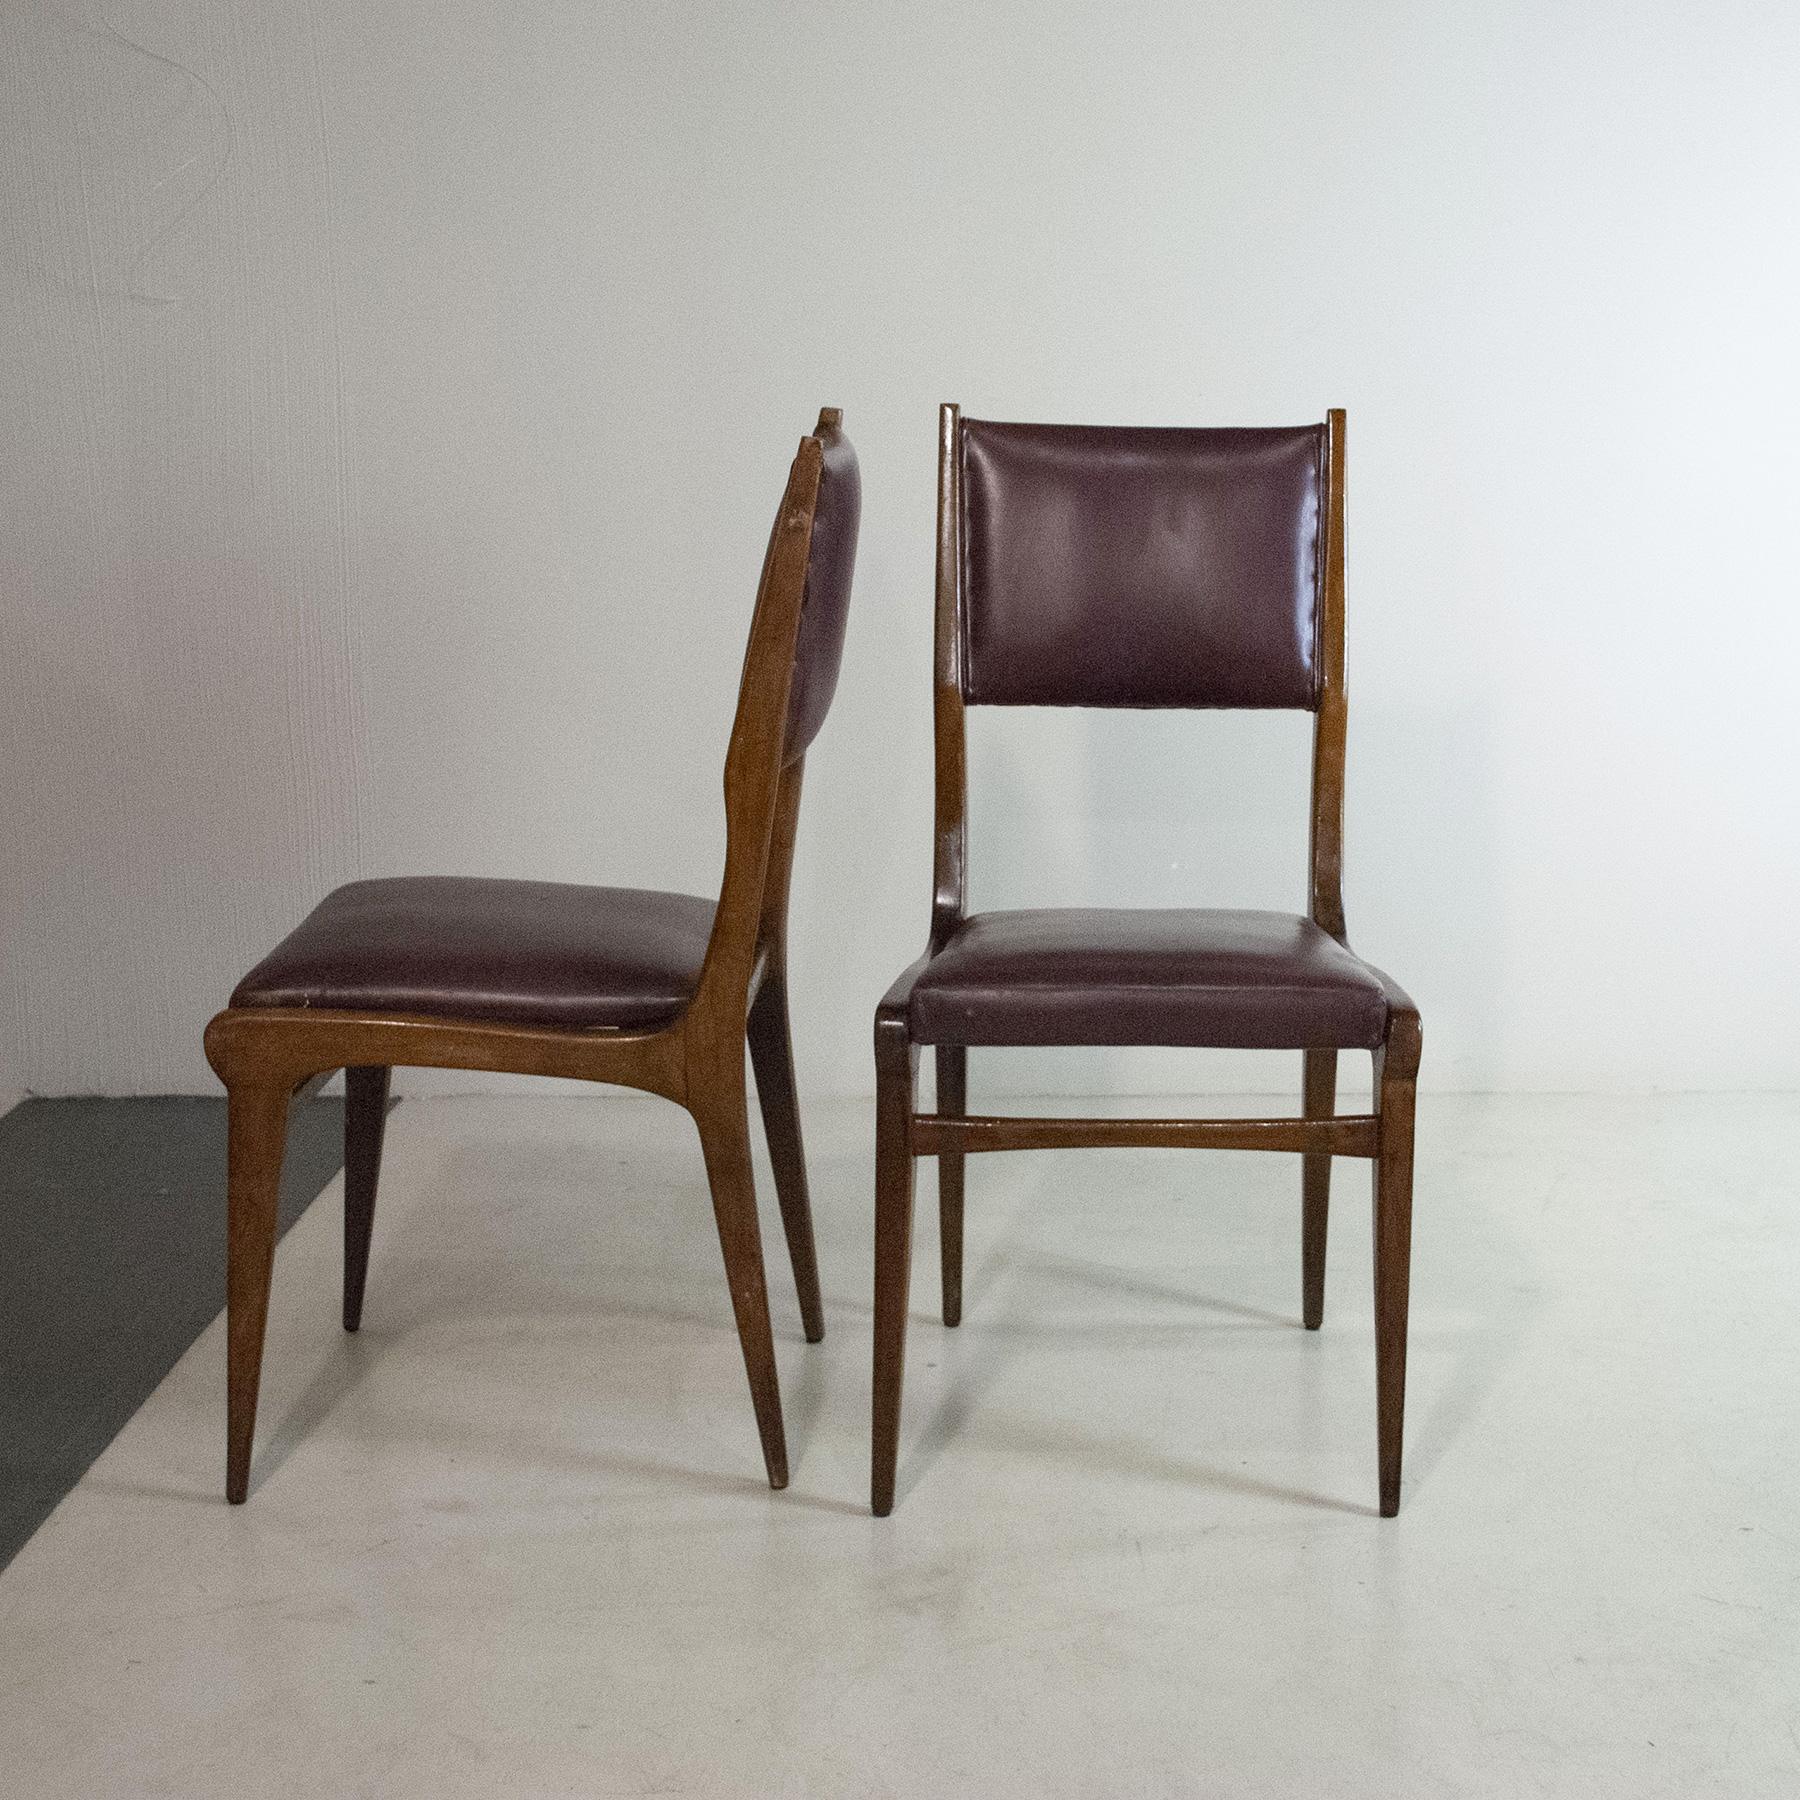 Carlo de Carli in the Style Italian Midcentury Chairs For Sale 5